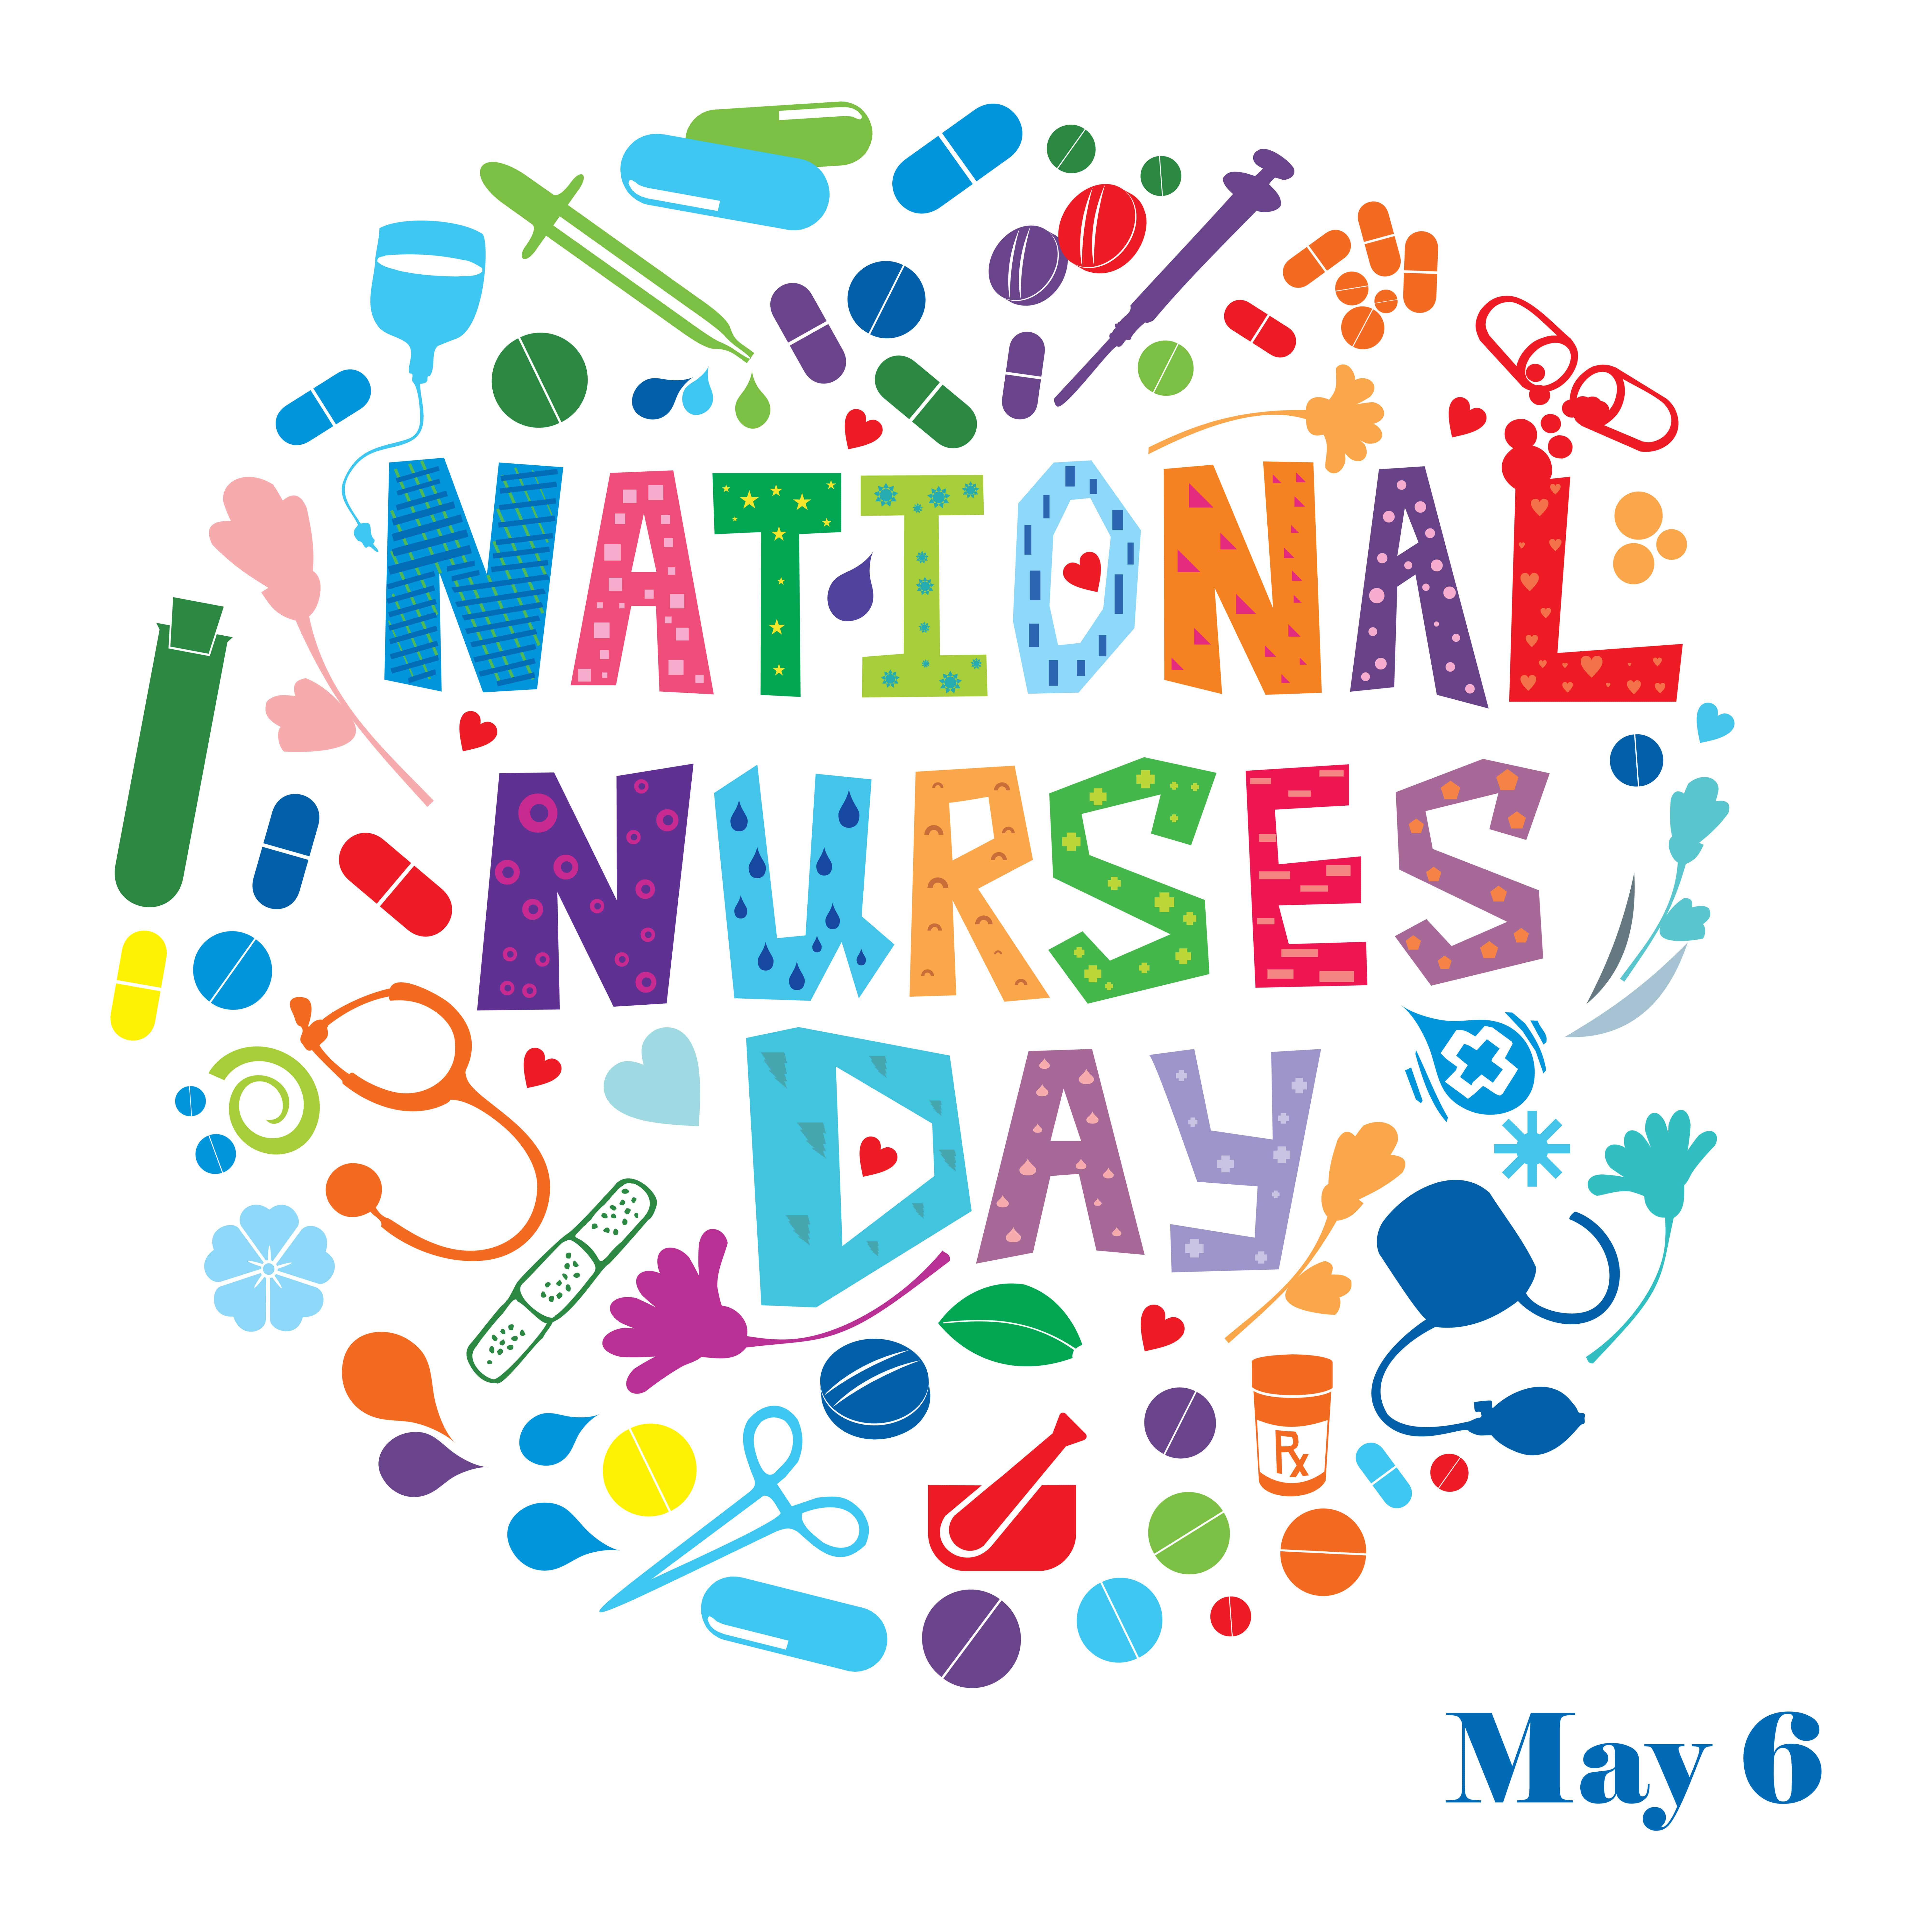 Our Appreciation to Every Nurse - Homes for Heroes®